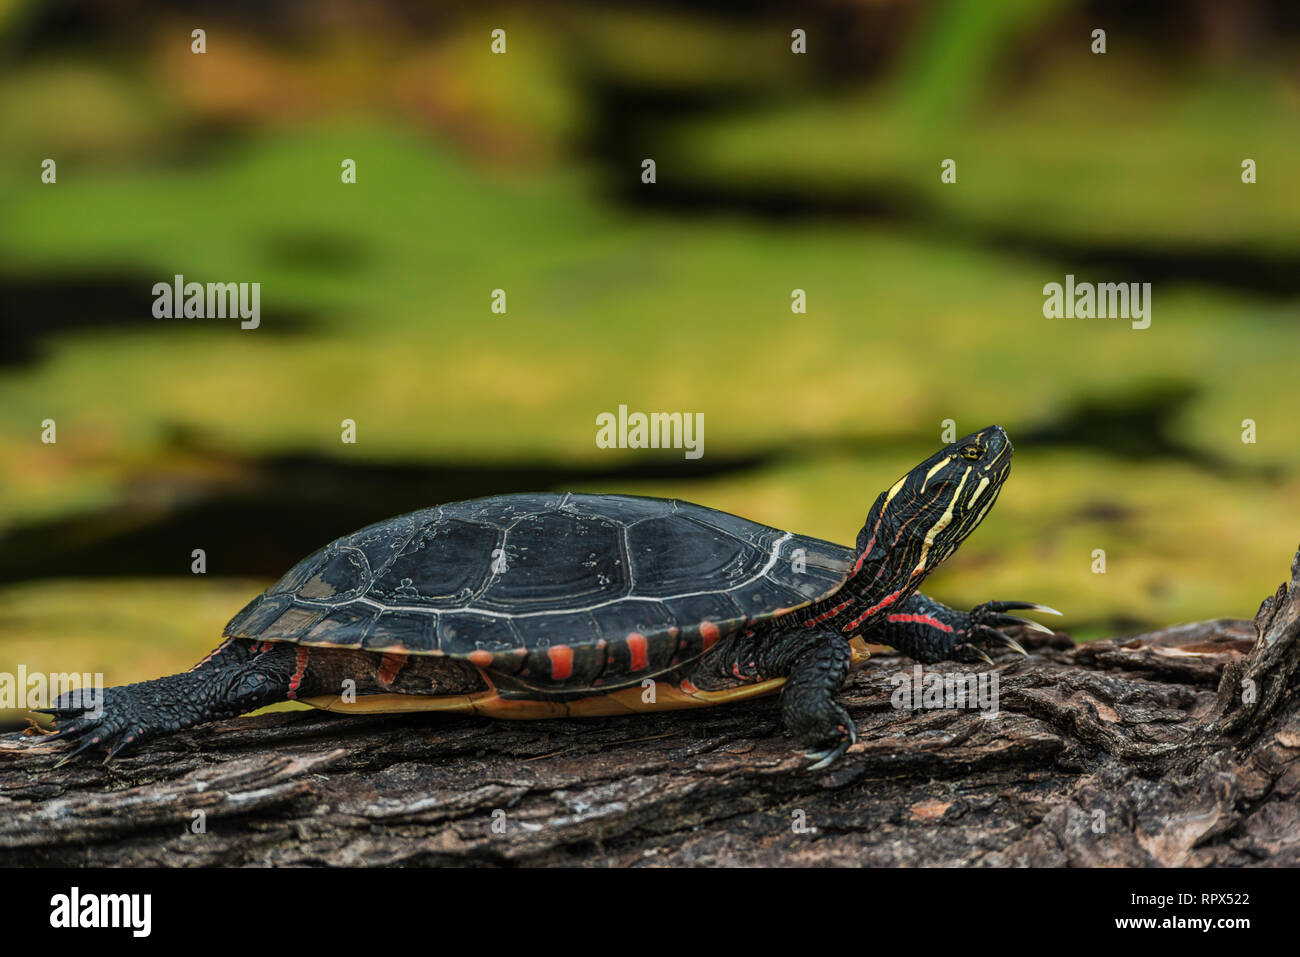 zoology / animals, reptile (reptilia), Eastern Painted Turtle (Chrysemys picta) sunning on a log in we, Additional-Rights-Clearance-Info-Not-Available Stock Photo